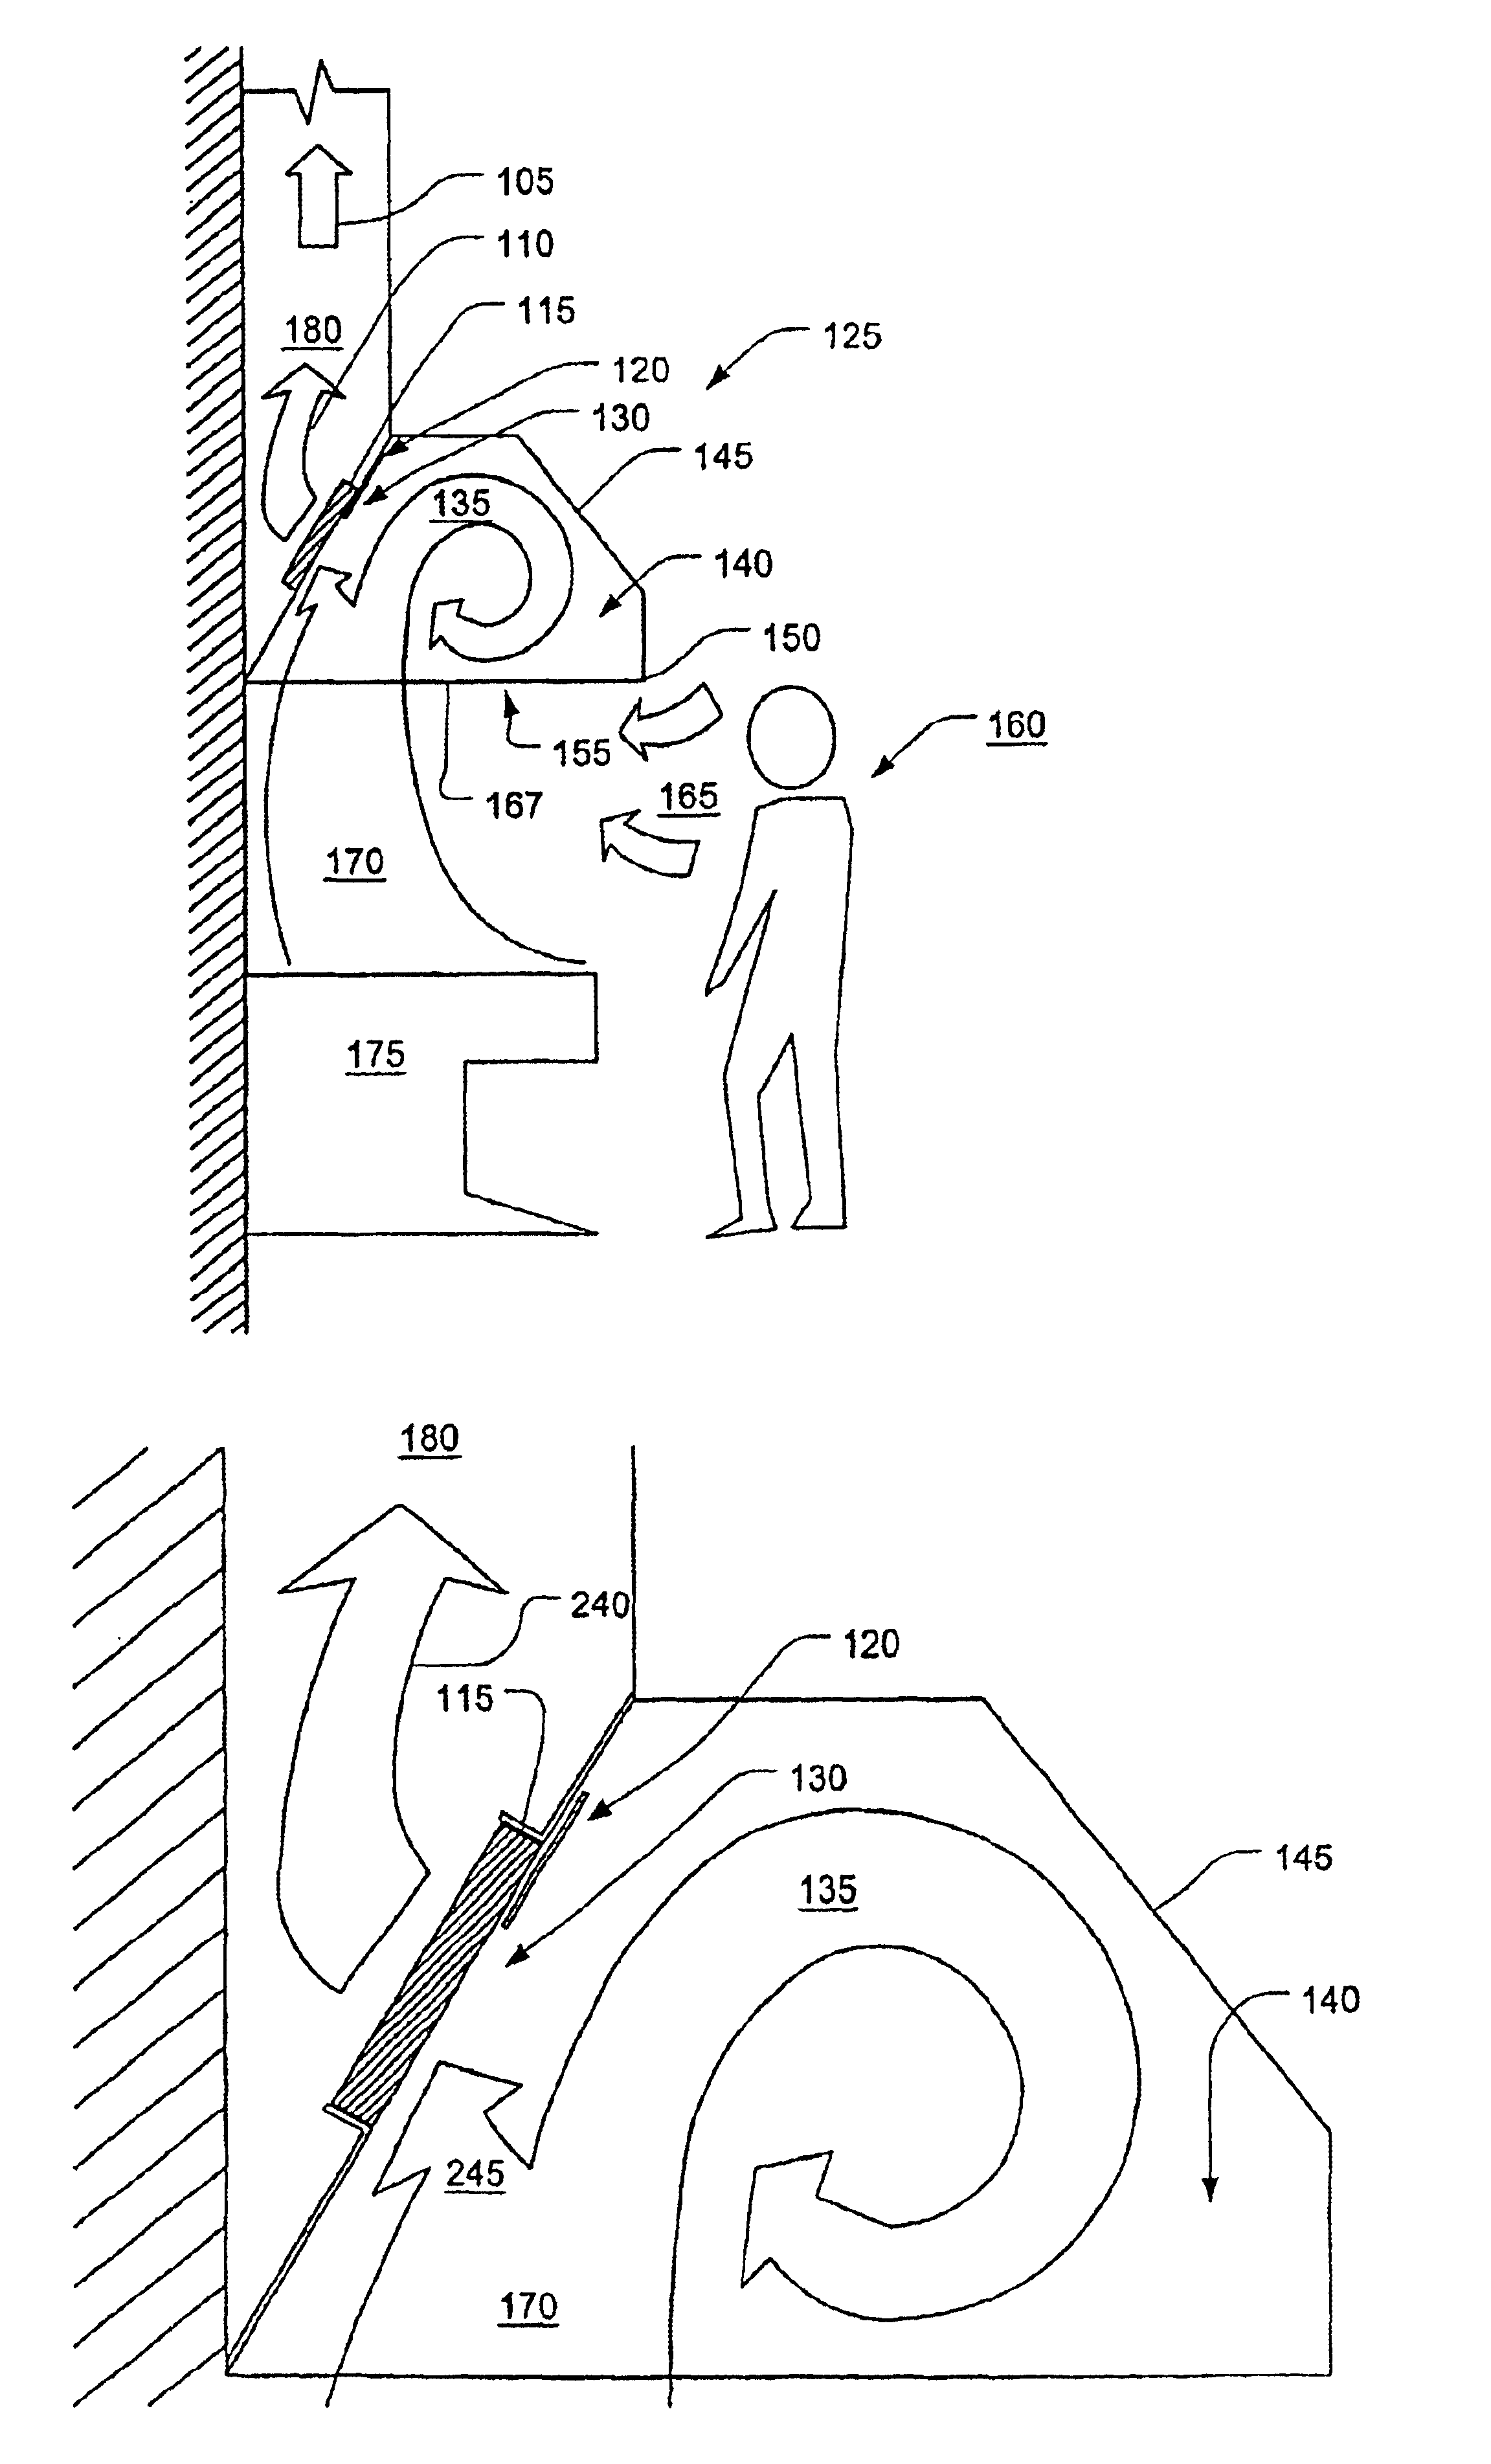 Device and method for controlling/balancing flow fluid flow-volume rate in flow channels